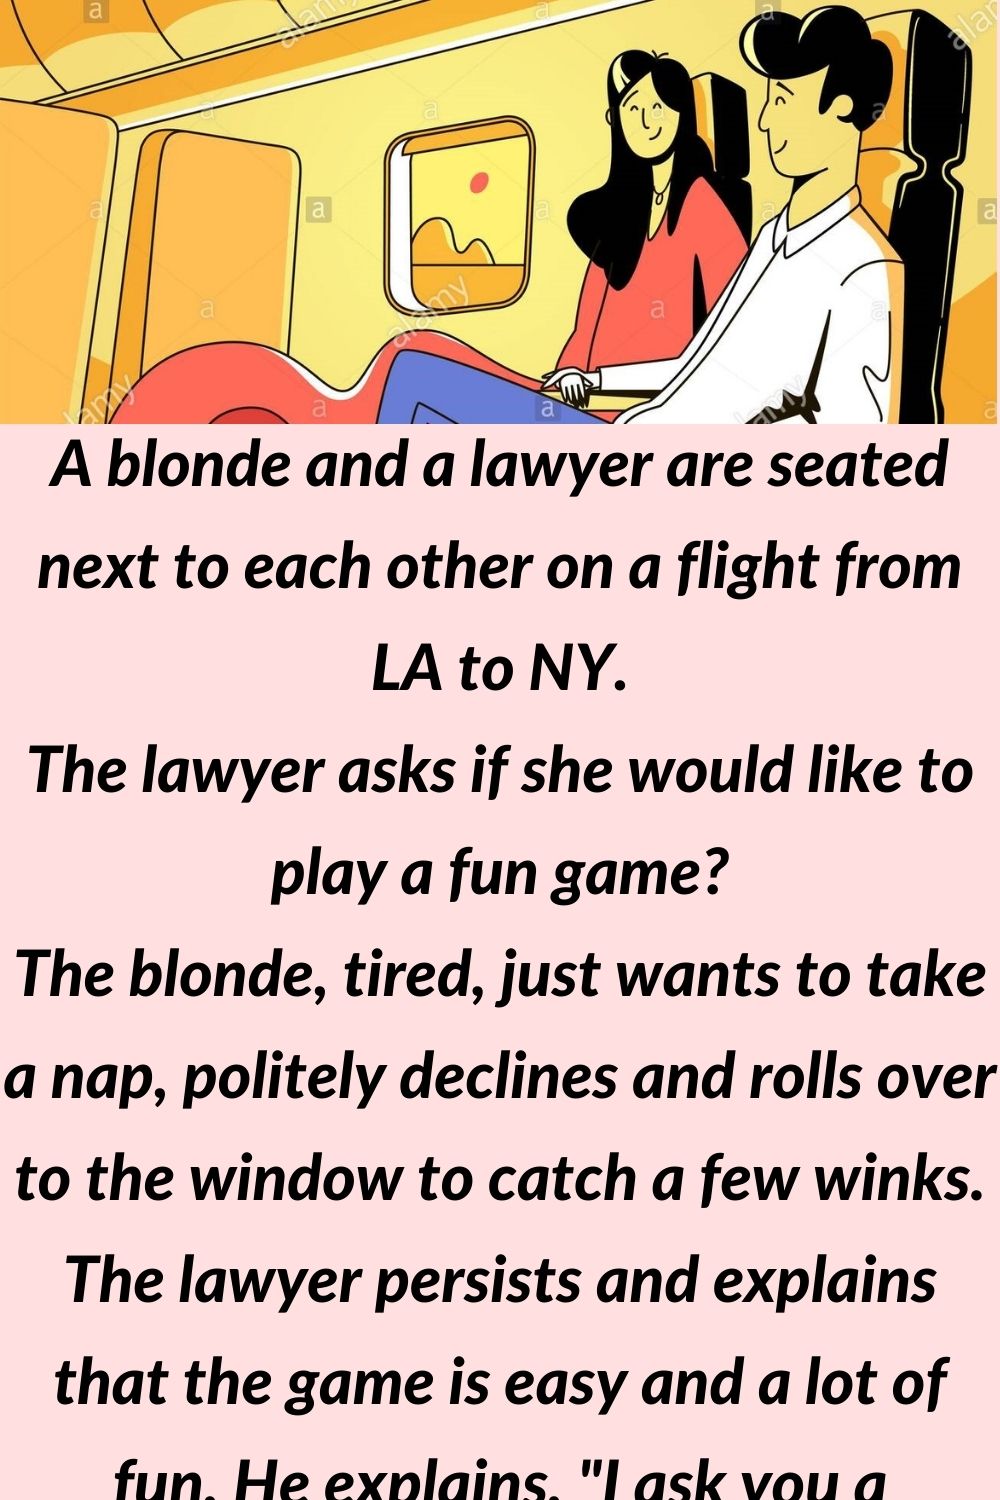 A blonde and a lawyer are seated next to each other on a flight